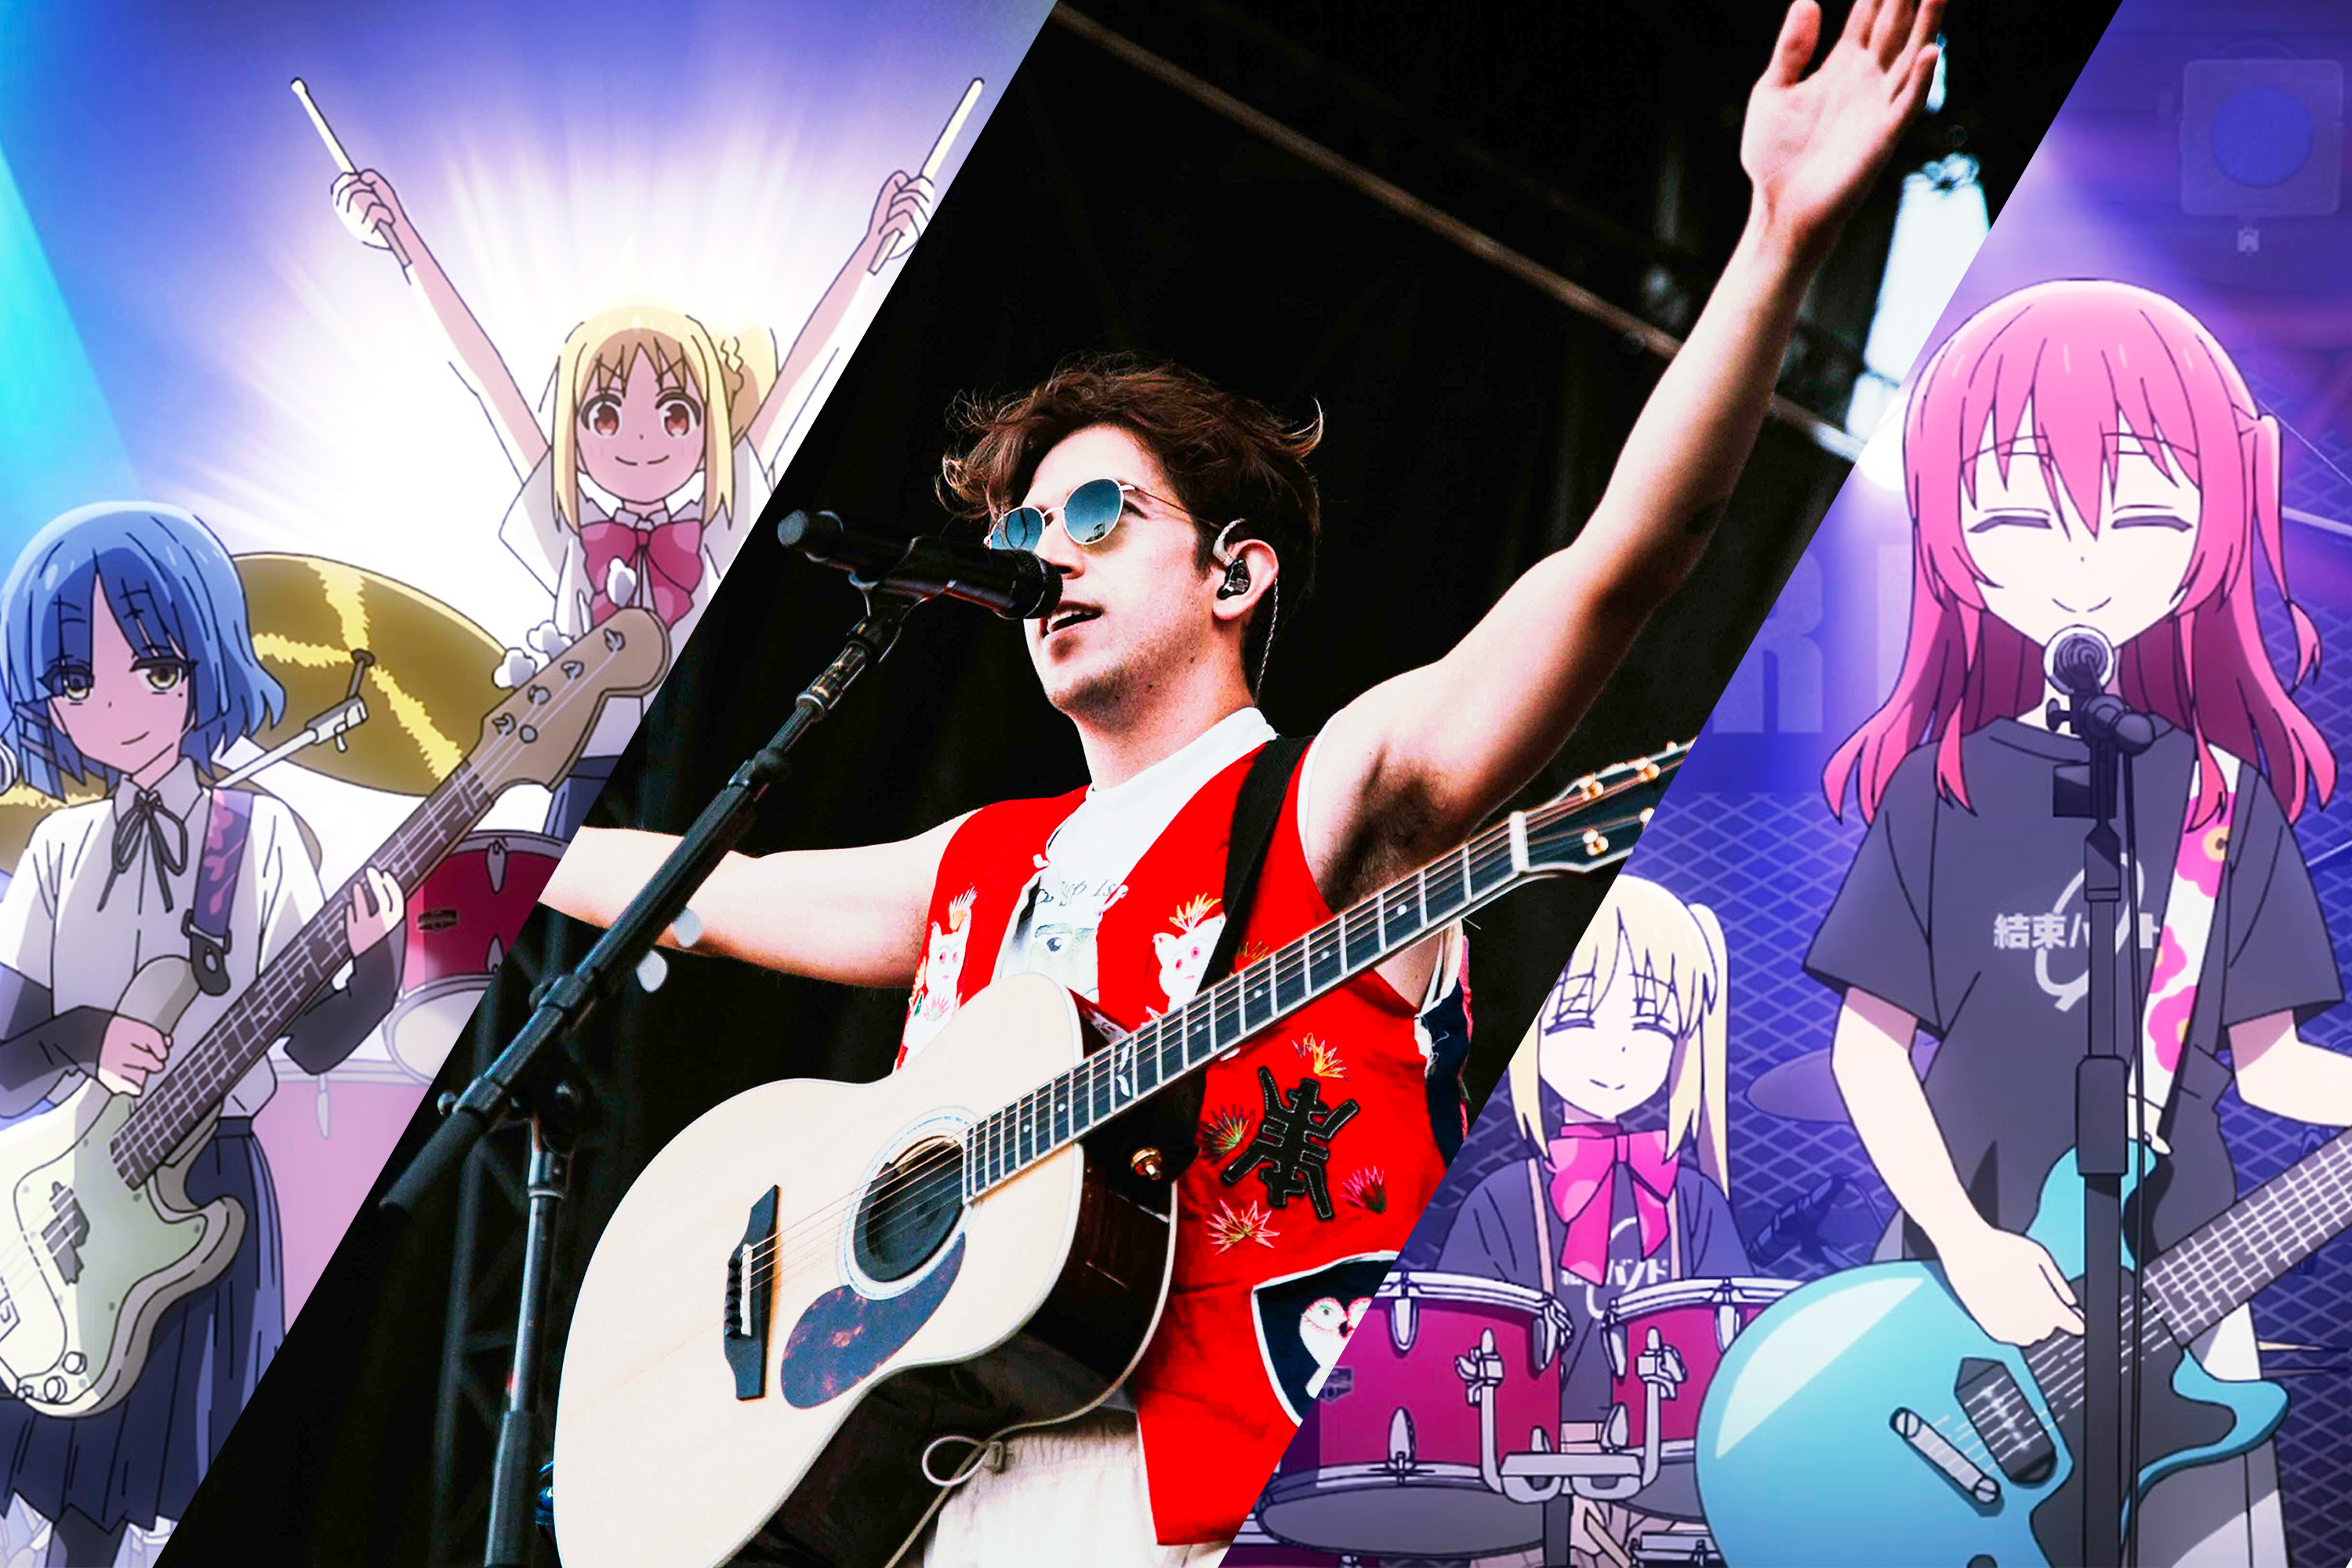 A photo illustration combining characters from Bocchi the Rock with a photo of the musician Ricky Montgomery performing live on stage.